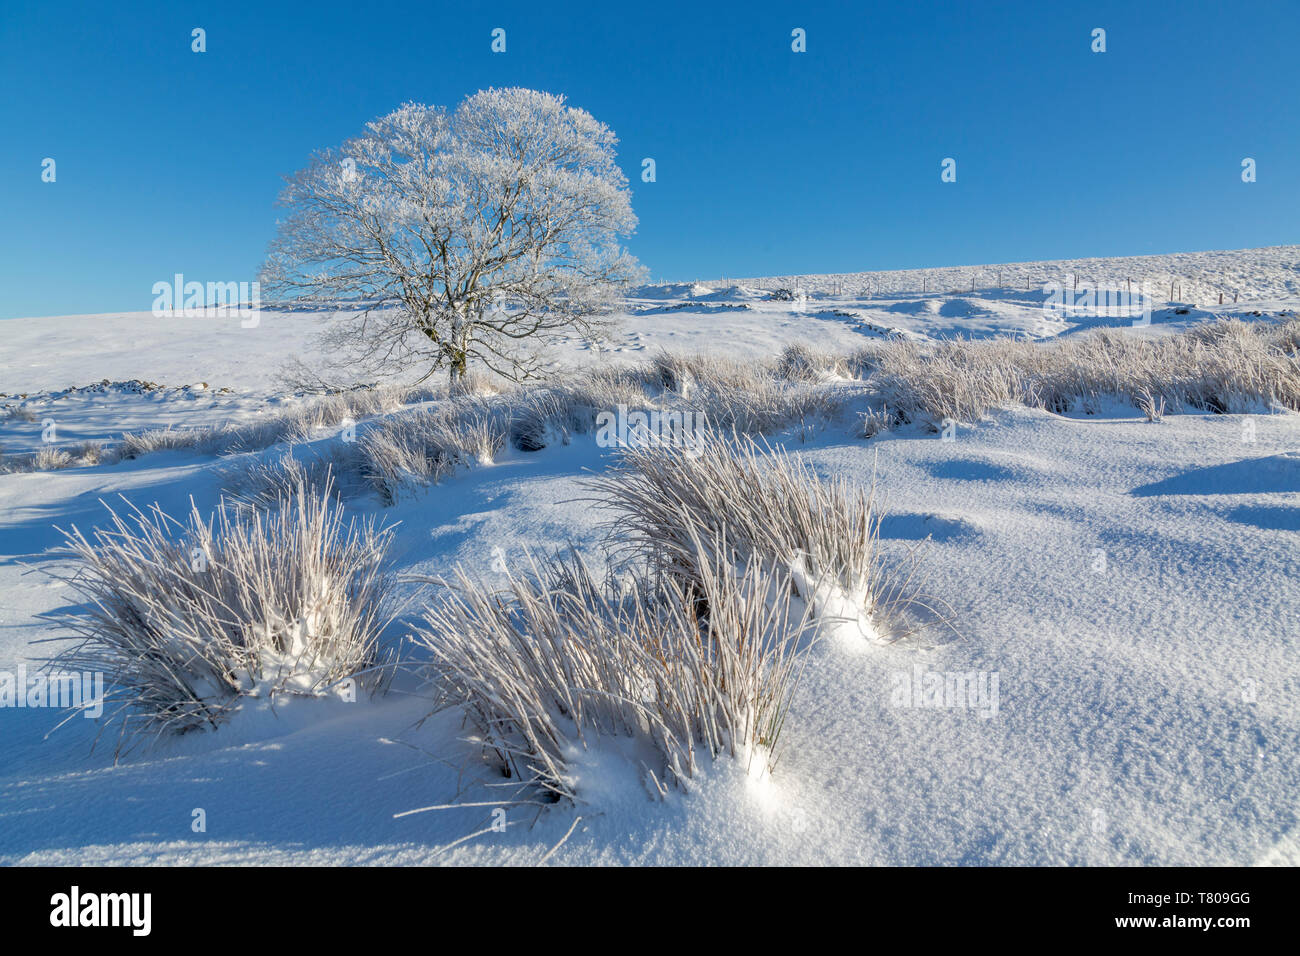 Panoramic view of frozen tree in snow covered landscape near Buxton, High Peak, Derbyshire, England, United Kingdom, Europe Stock Photo